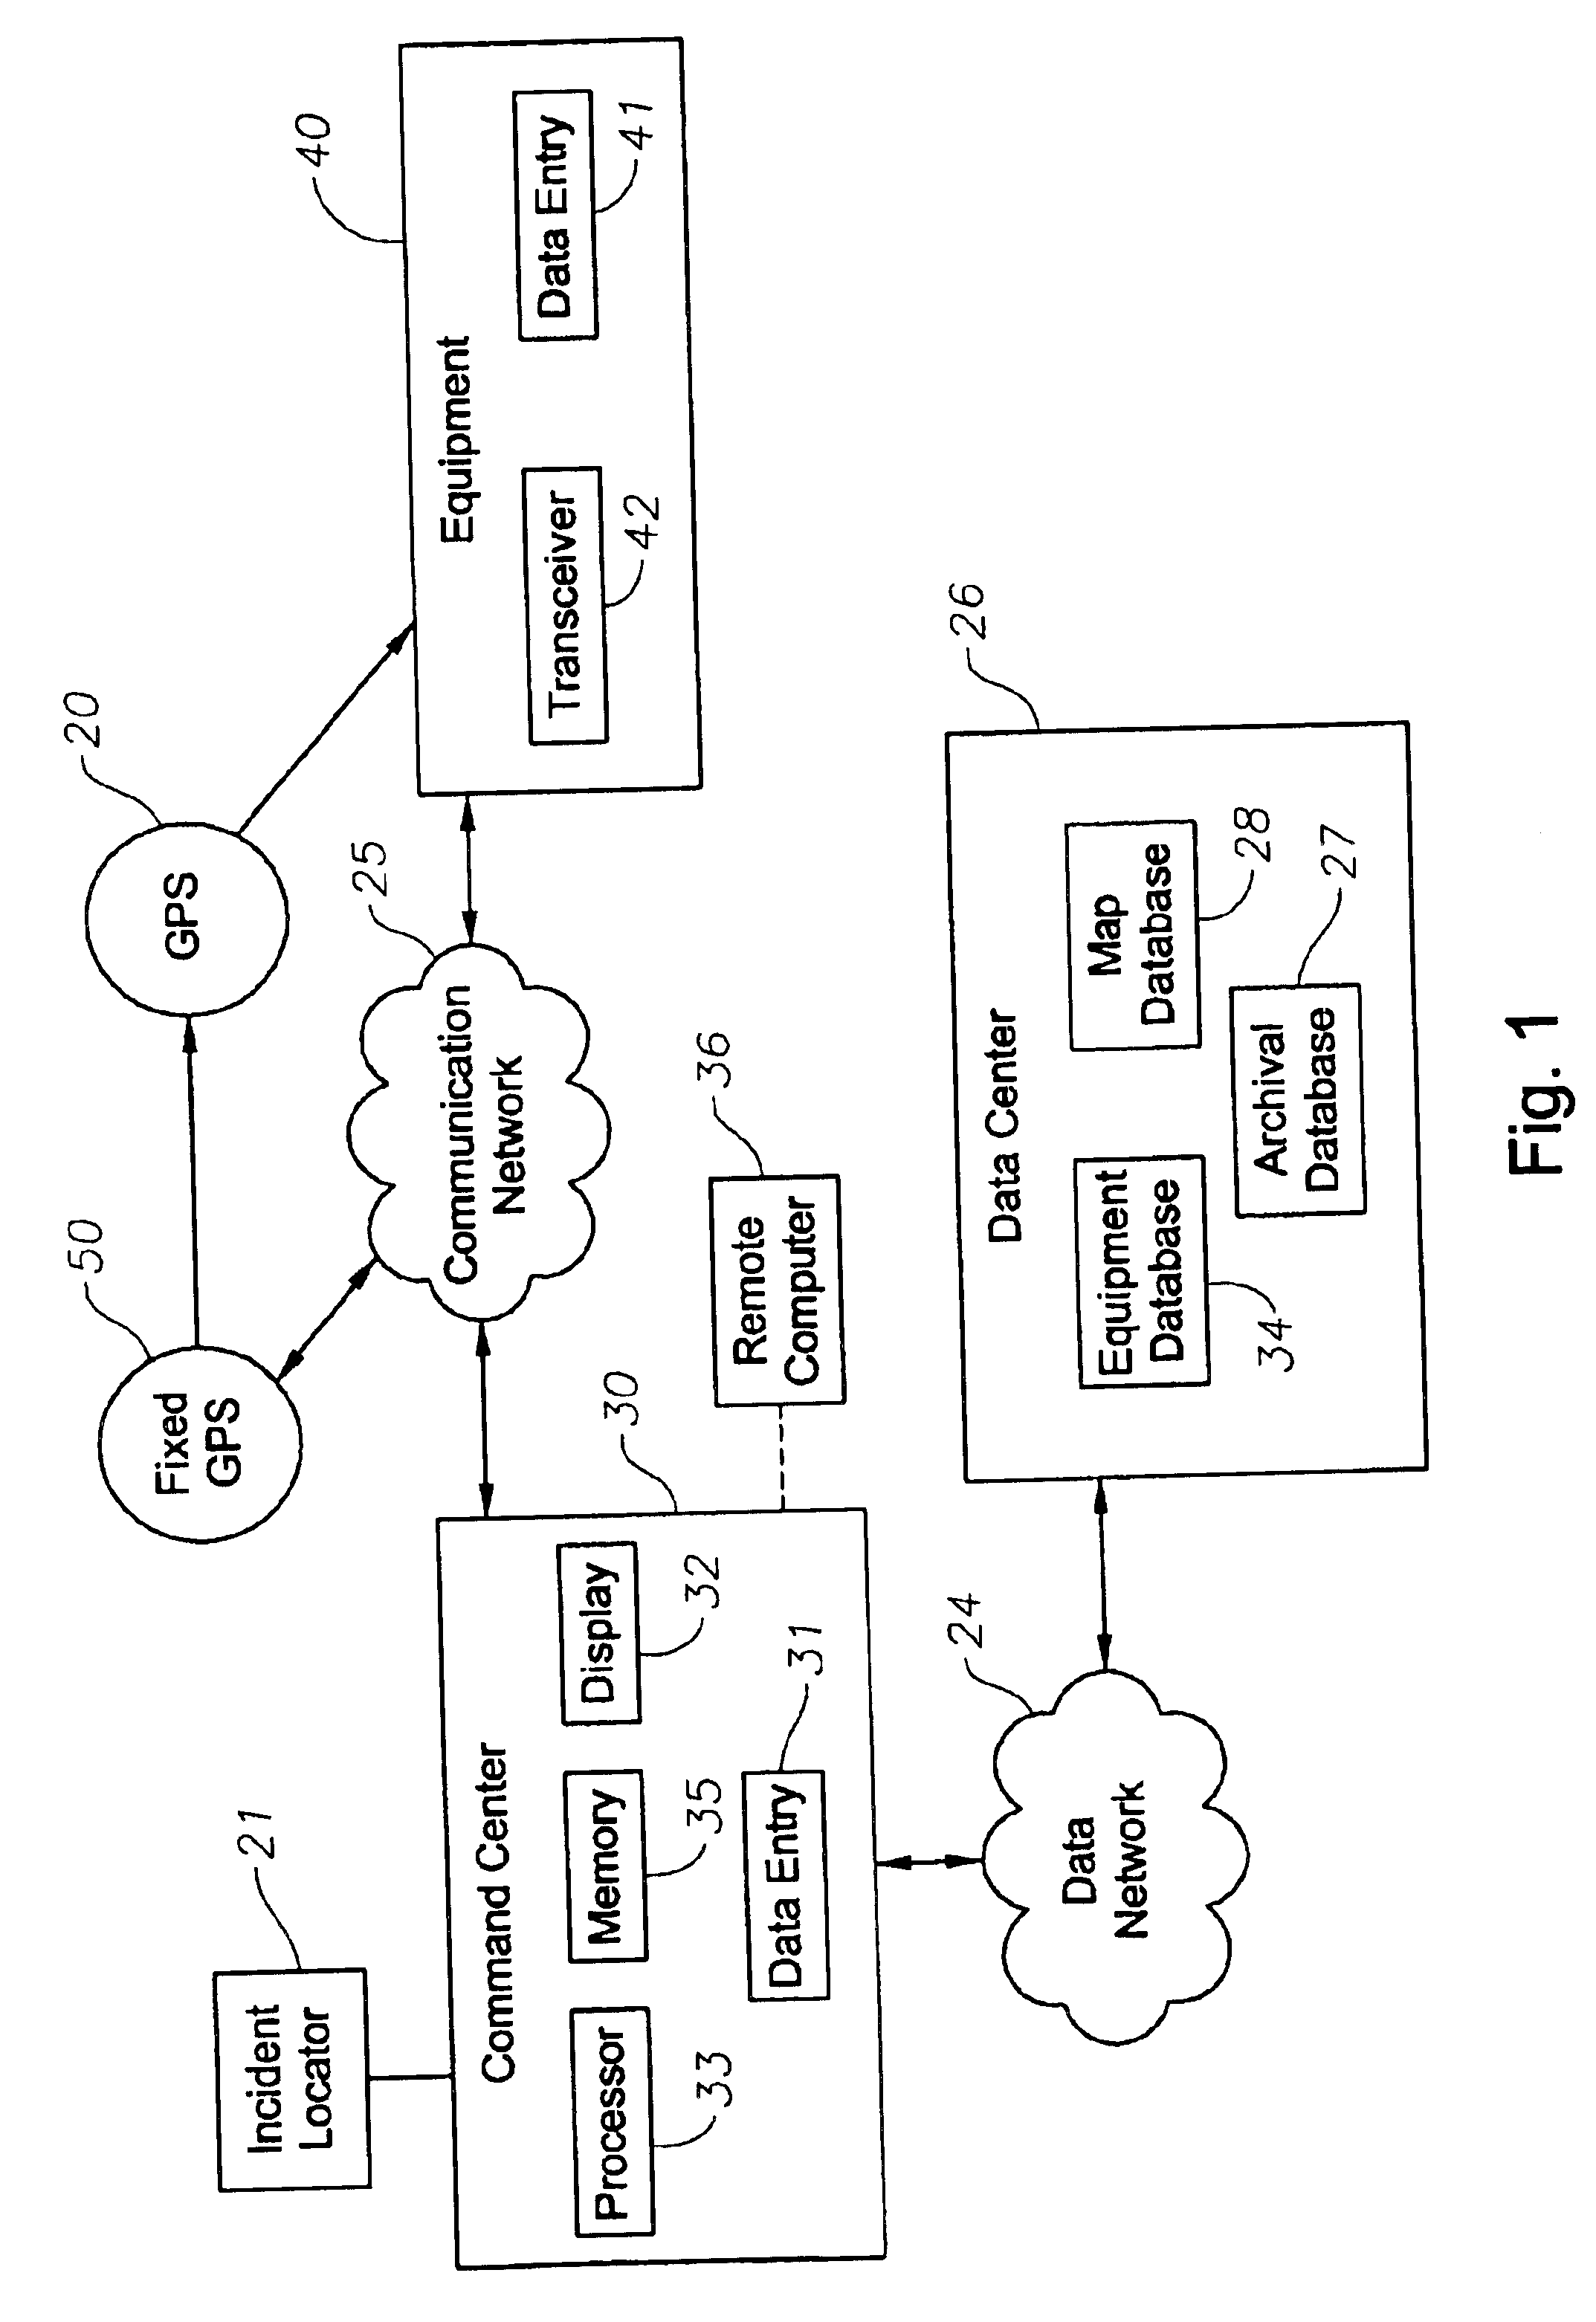 Interactive system for monitoring and inventory of emergency vehicles and equipment and associated methods